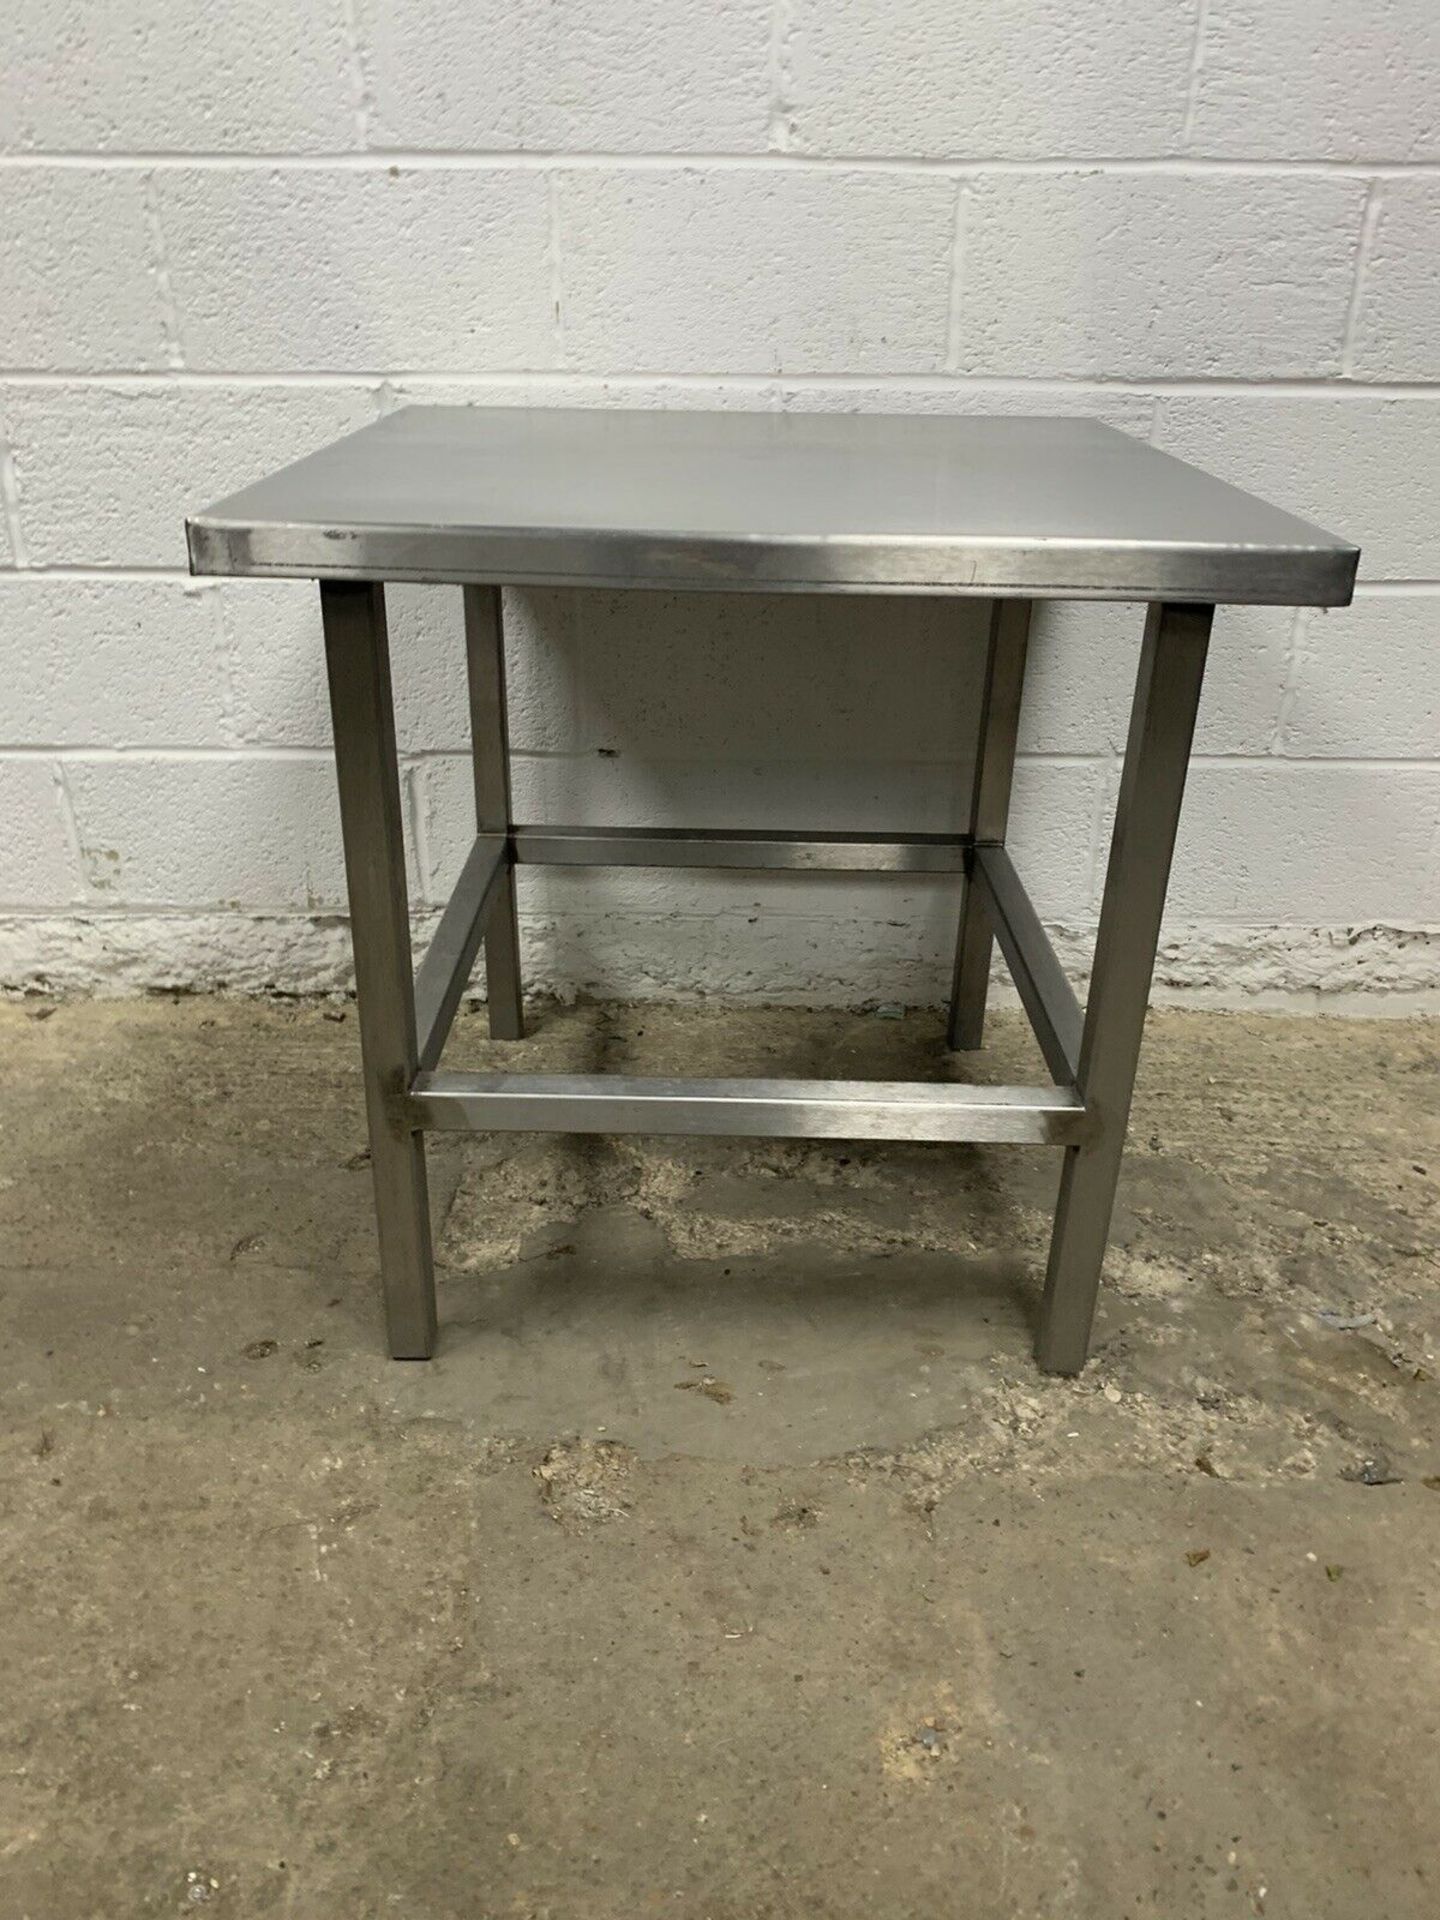 Stainless Steel Preperation Unit - Image 2 of 4